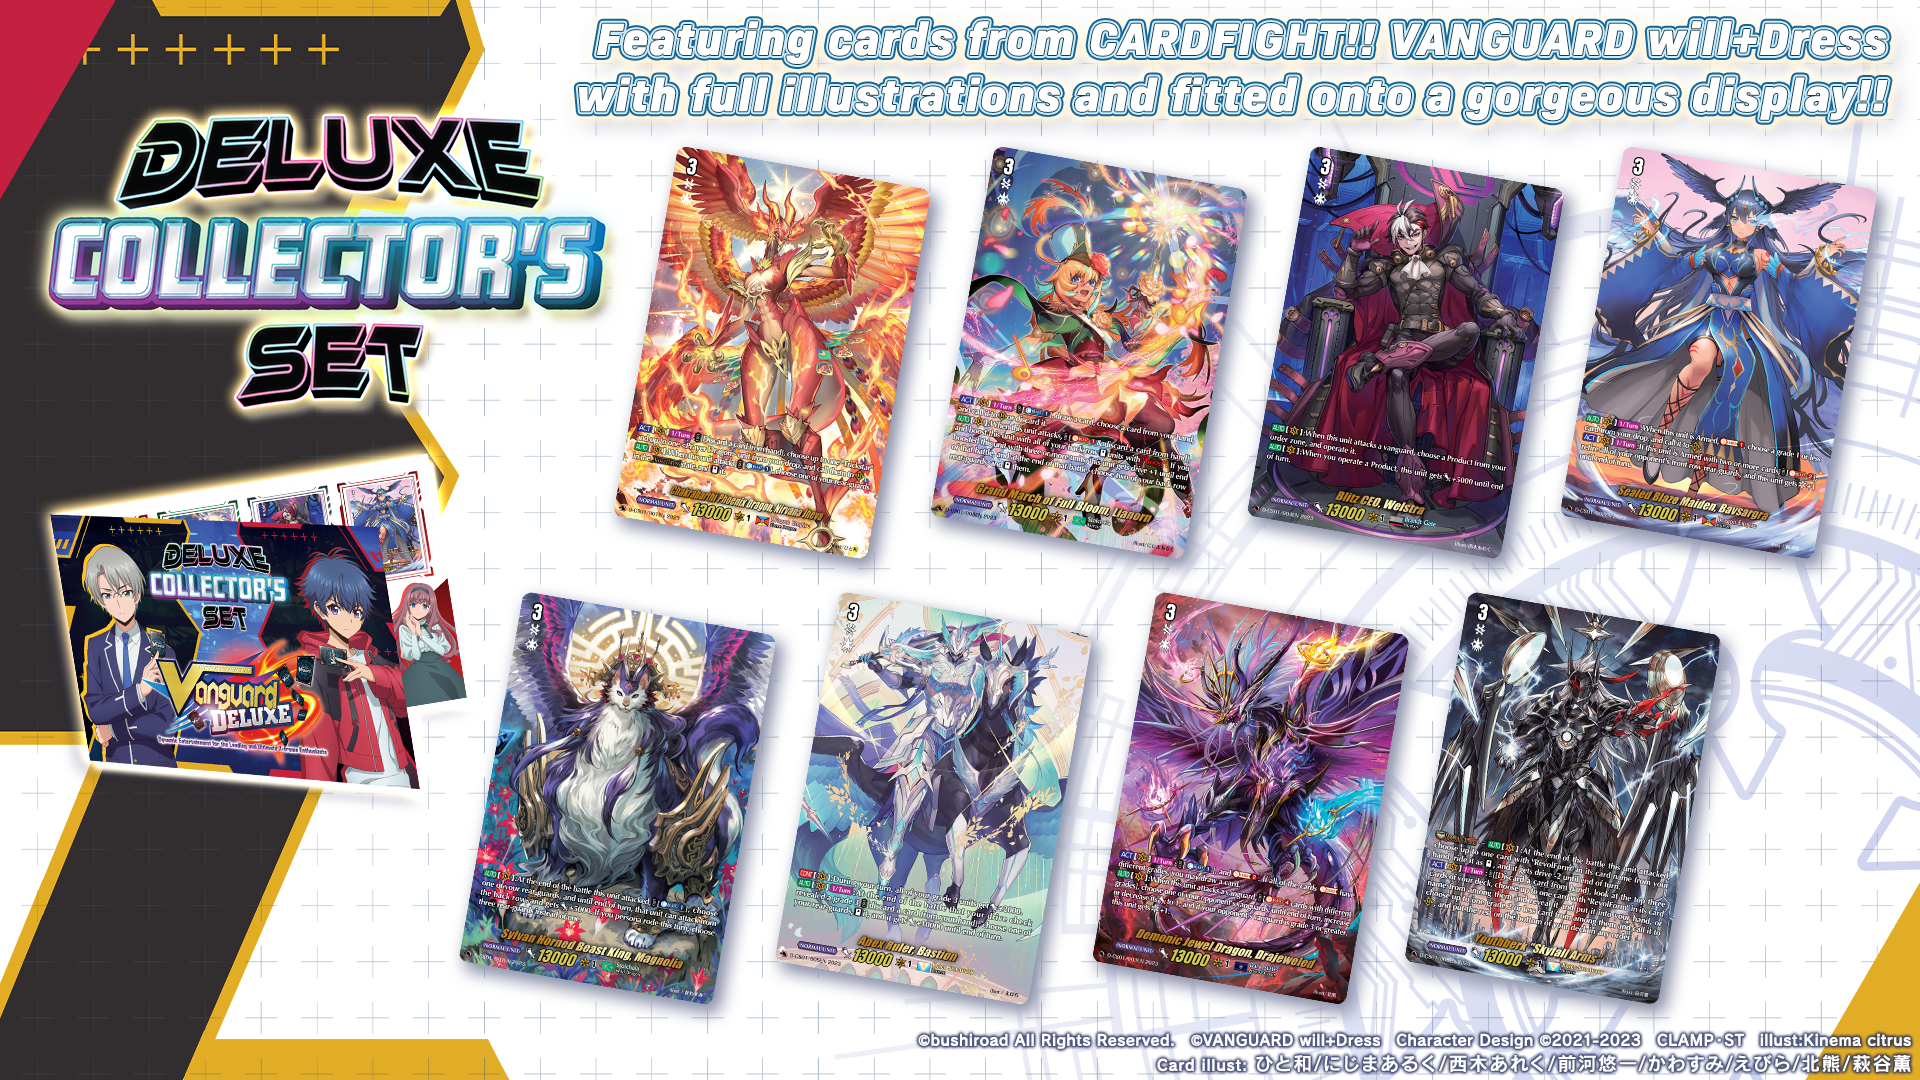 Cardfight!! Vanguard Deluxe Collector's Set 01: CARDFIGHT!! VANGUARD DELUXE